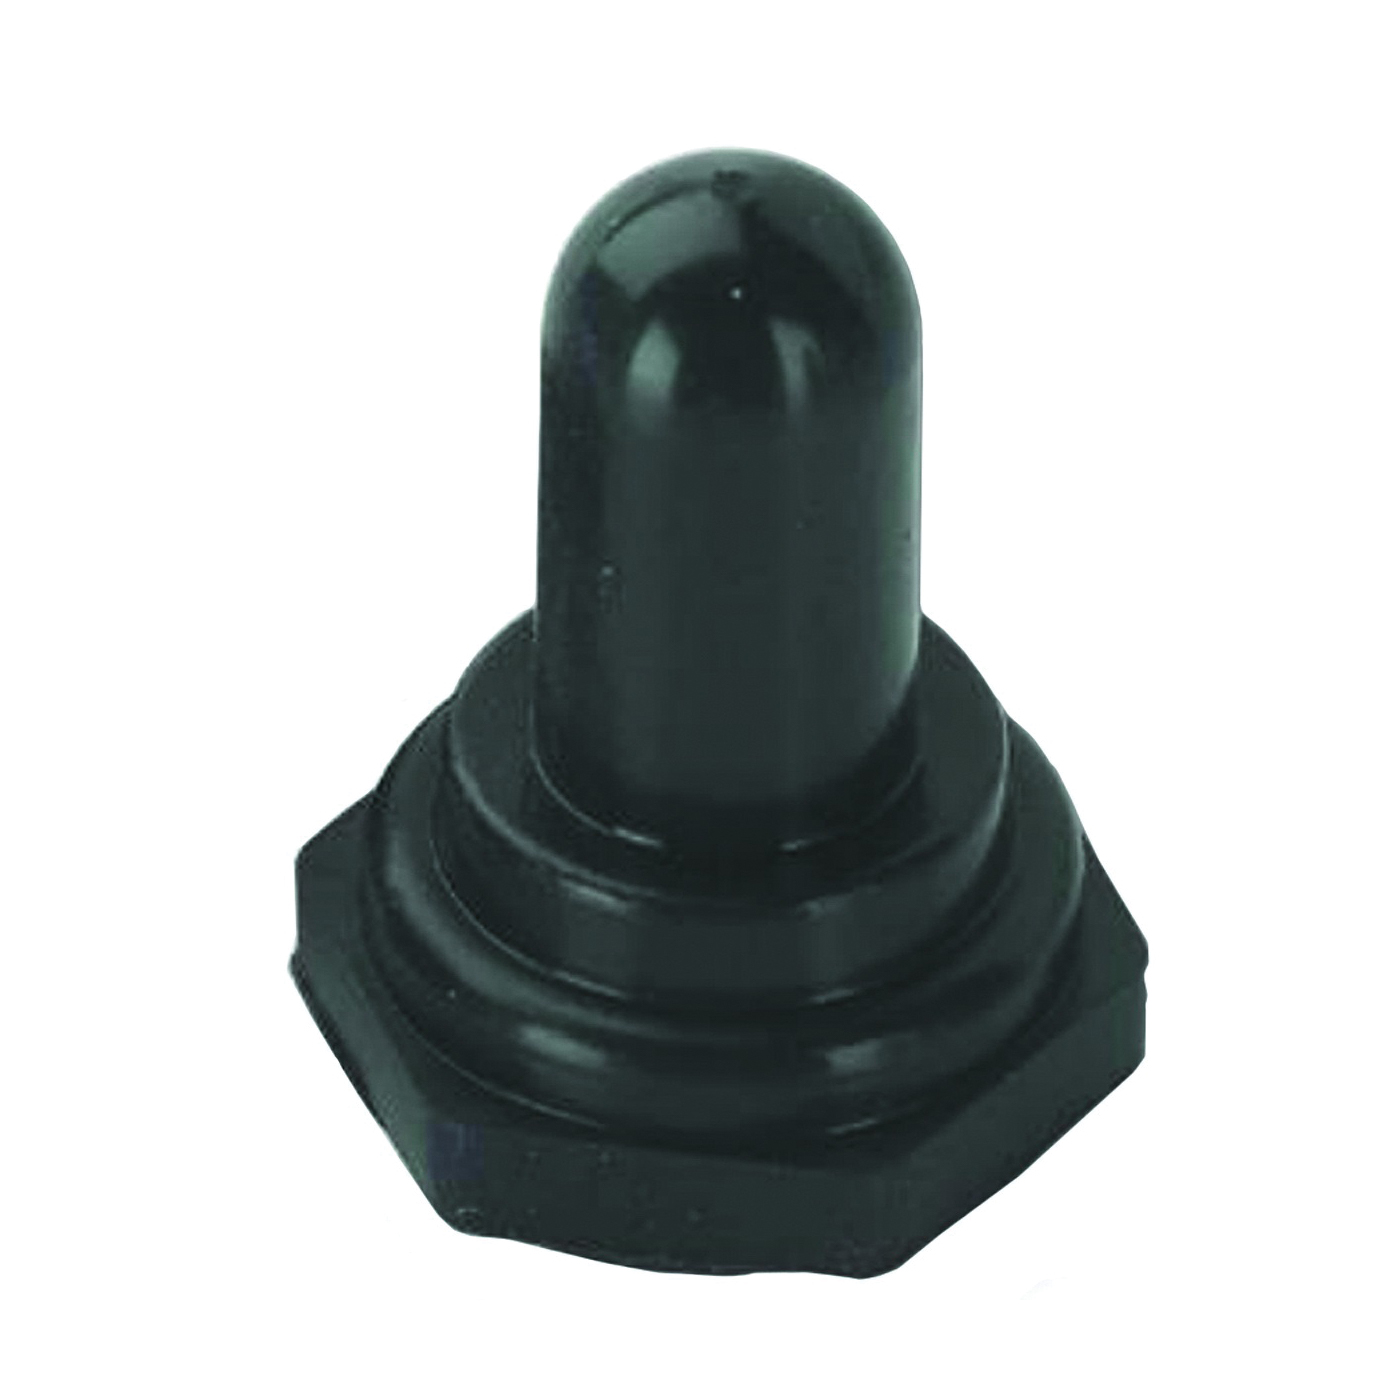 GB GSW-20 Toggle Switch Covers, EDPM Rubber - 1